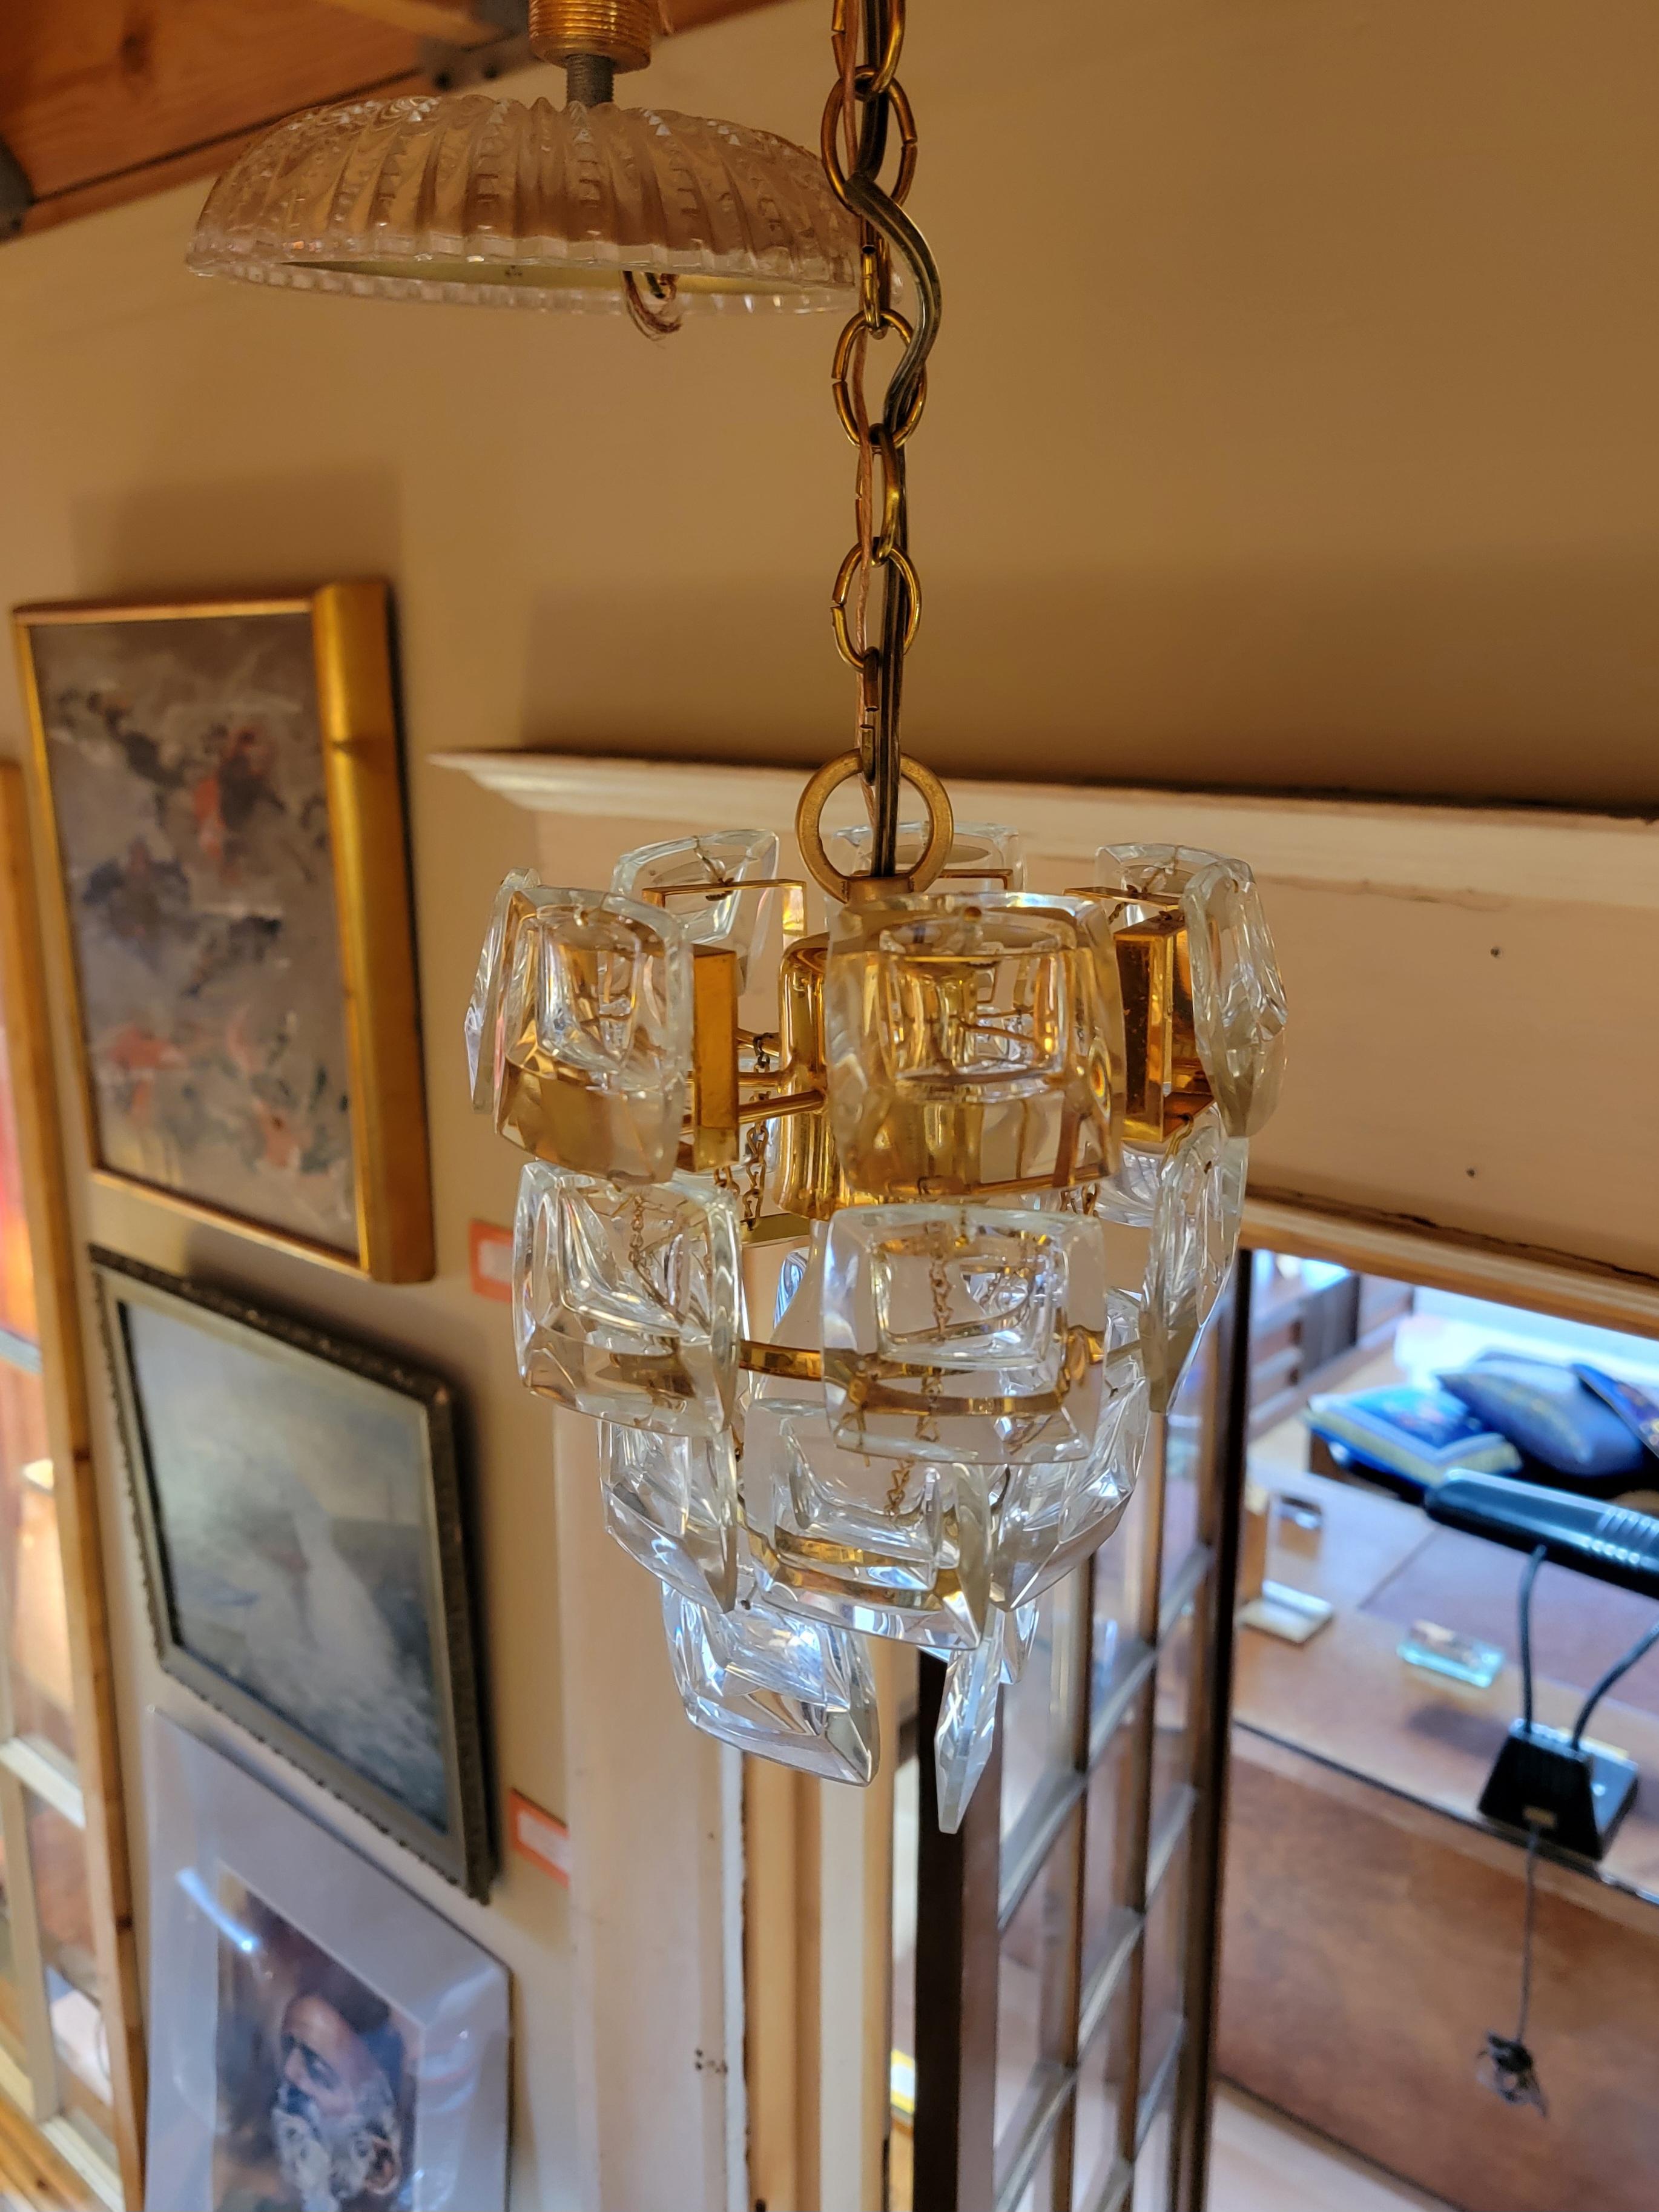 A pair of conical ceiling lights / pendant lights by Palwa, Germany. Attributed to Gaetano Sciolari. Circa. 1970's. Original escutcheon plates made of brass with a glass cover. In original working order. Chain length measures approximately 20